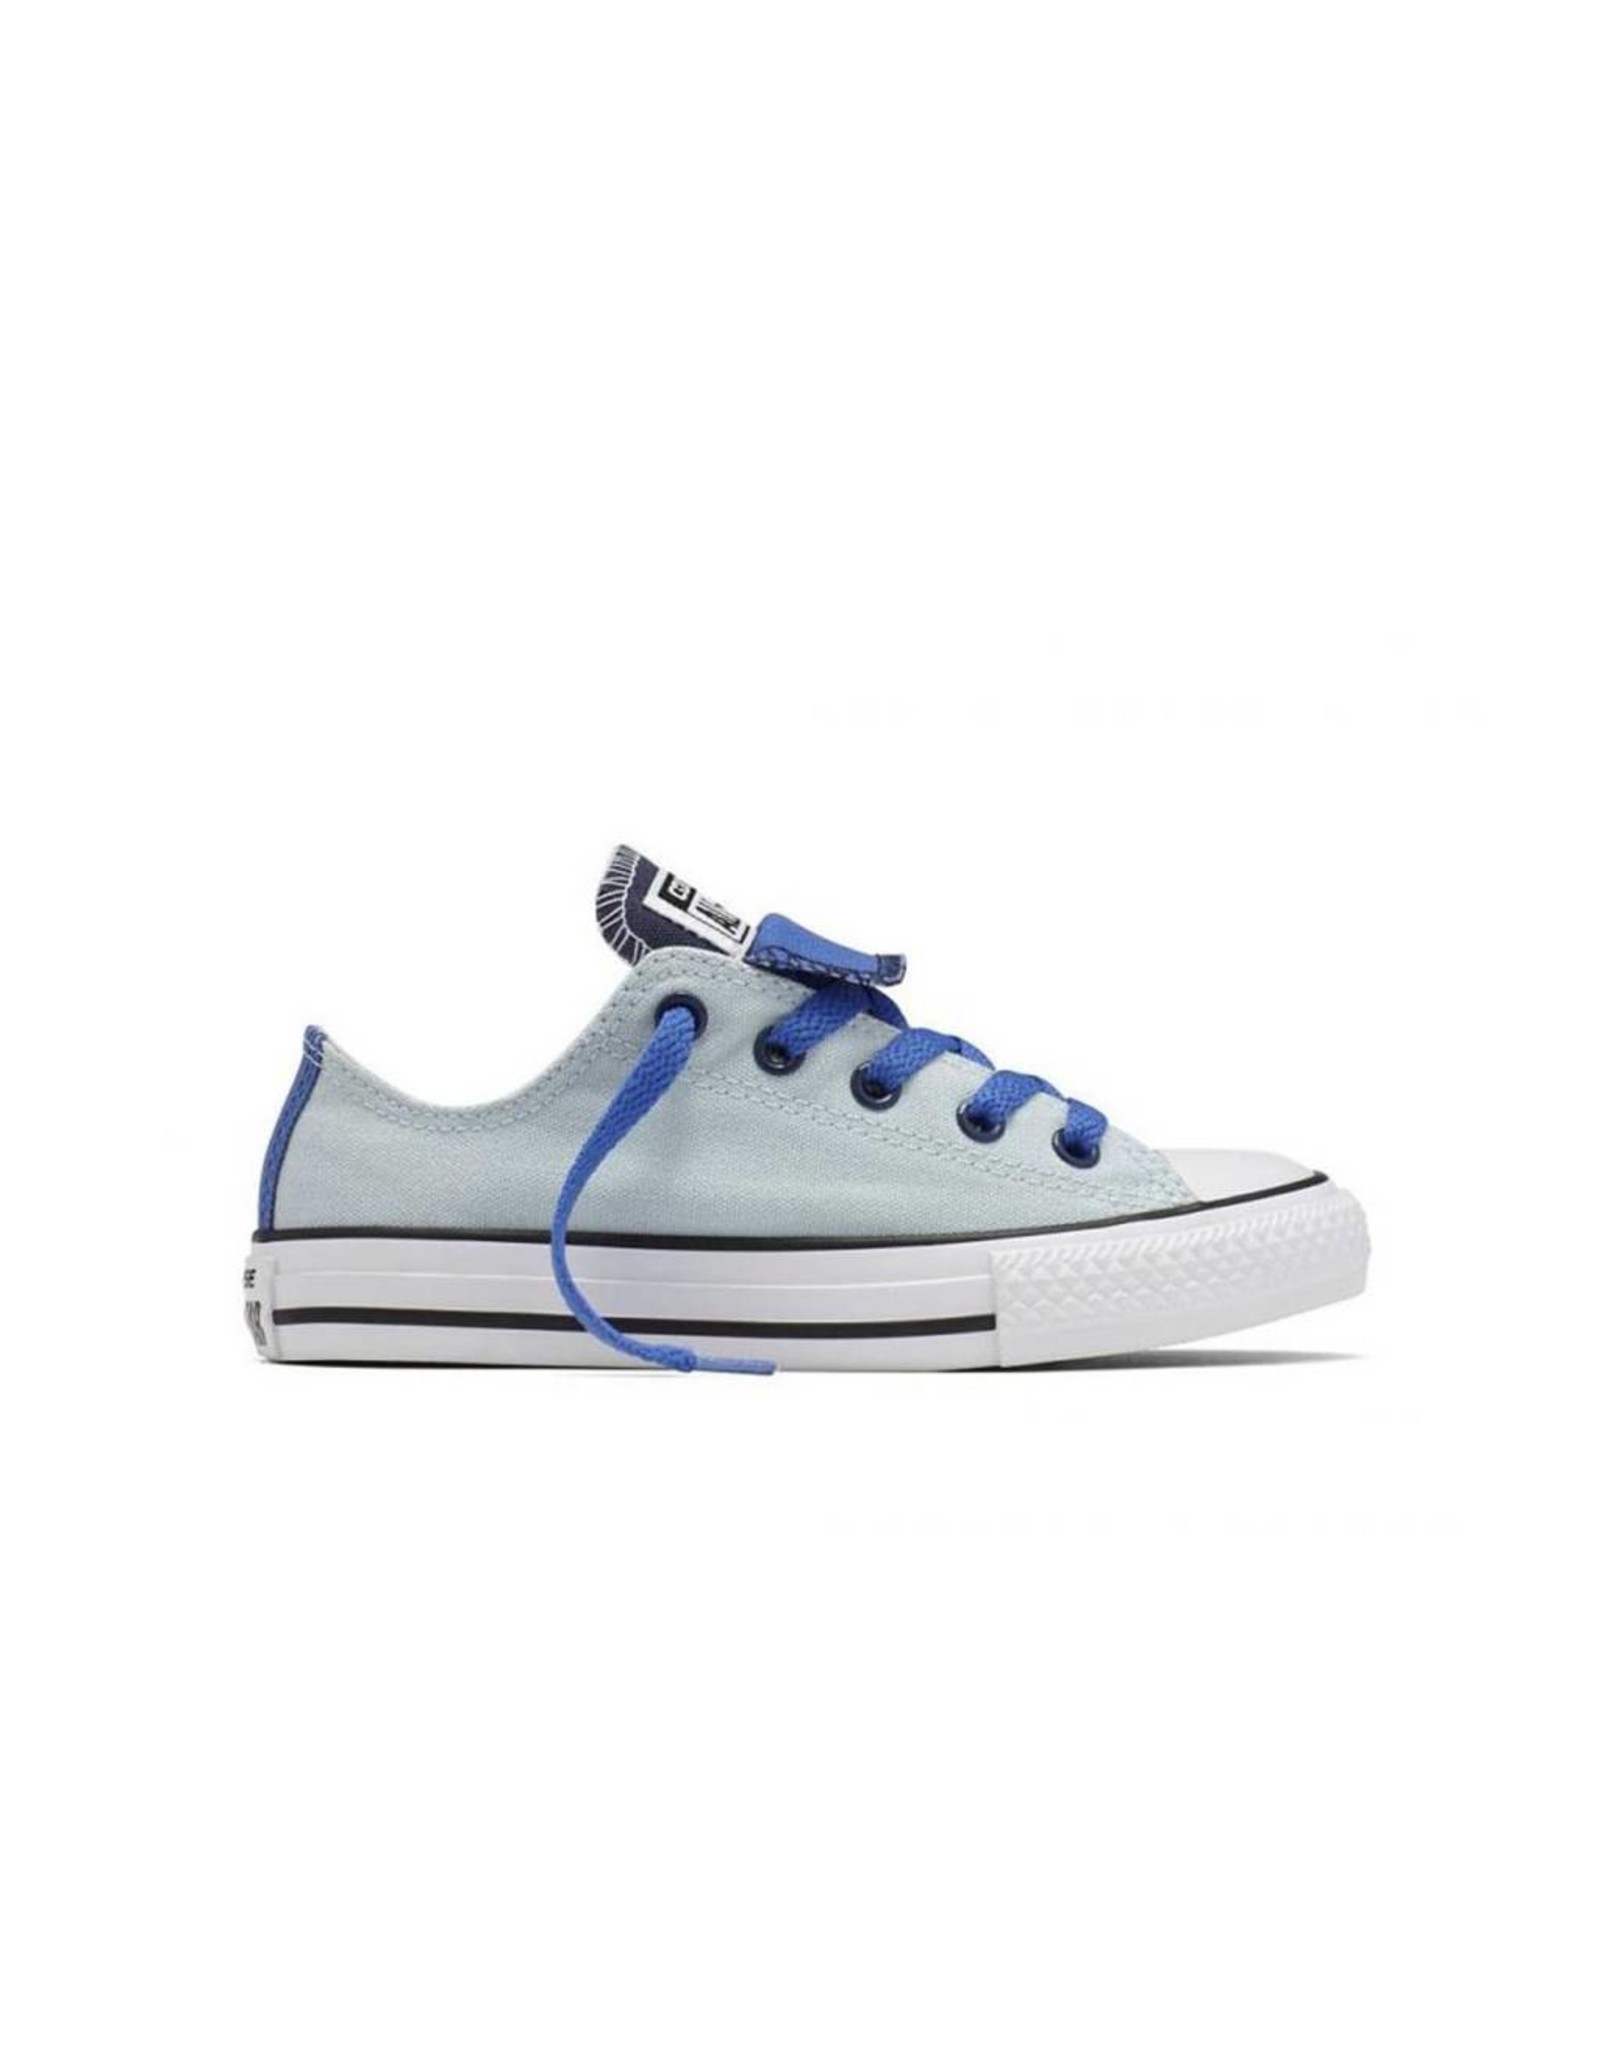 converse double tongue white and blue